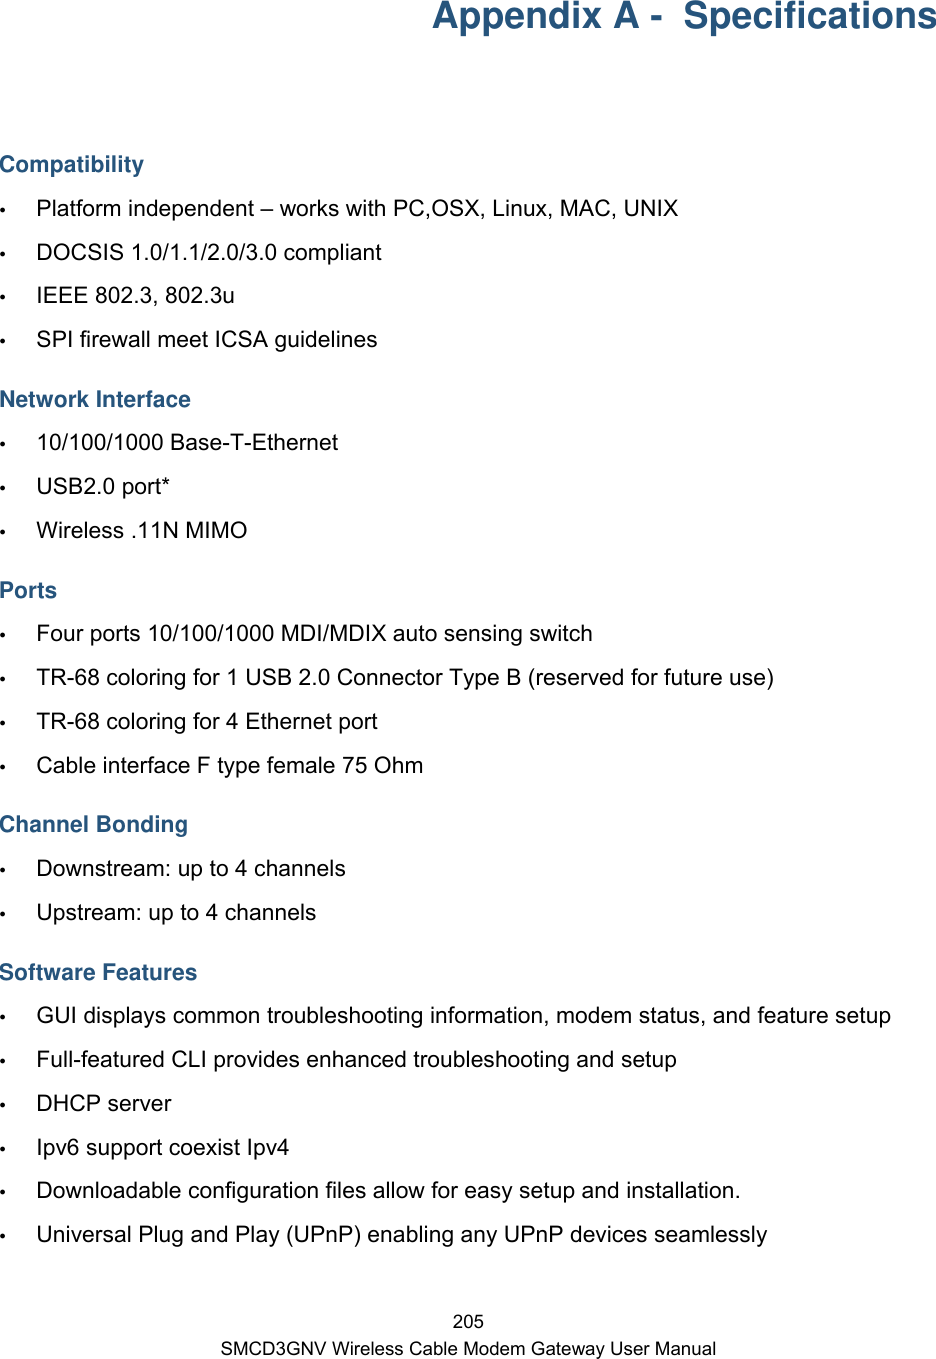  205 SMCD3GNV Wireless Cable Modem Gateway User Manual Appendix A -  Specifications  Compatibility  Platform independent – works with PC,OSX, Linux, MAC, UNIX  DOCSIS 1.0/1.1/2.0/3.0 compliant  IEEE 802.3, 802.3u   SPI firewall meet ICSA guidelines Network Interface  10/100/1000 Base-T-Ethernet  USB2.0 port*  Wireless .11N MIMO Ports  Four ports 10/100/1000 MDI/MDIX auto sensing switch  TR-68 coloring for 1 USB 2.0 Connector Type B (reserved for future use)  TR-68 coloring for 4 Ethernet port   Cable interface F type female 75 Ohm Channel Bonding  Downstream: up to 4 channels  Upstream: up to 4 channels Software Features  GUI displays common troubleshooting information, modem status, and feature setup  Full-featured CLI provides enhanced troubleshooting and setup  DHCP server  Ipv6 support coexist Ipv4  Downloadable configuration files allow for easy setup and installation.  Universal Plug and Play (UPnP) enabling any UPnP devices seamlessly 